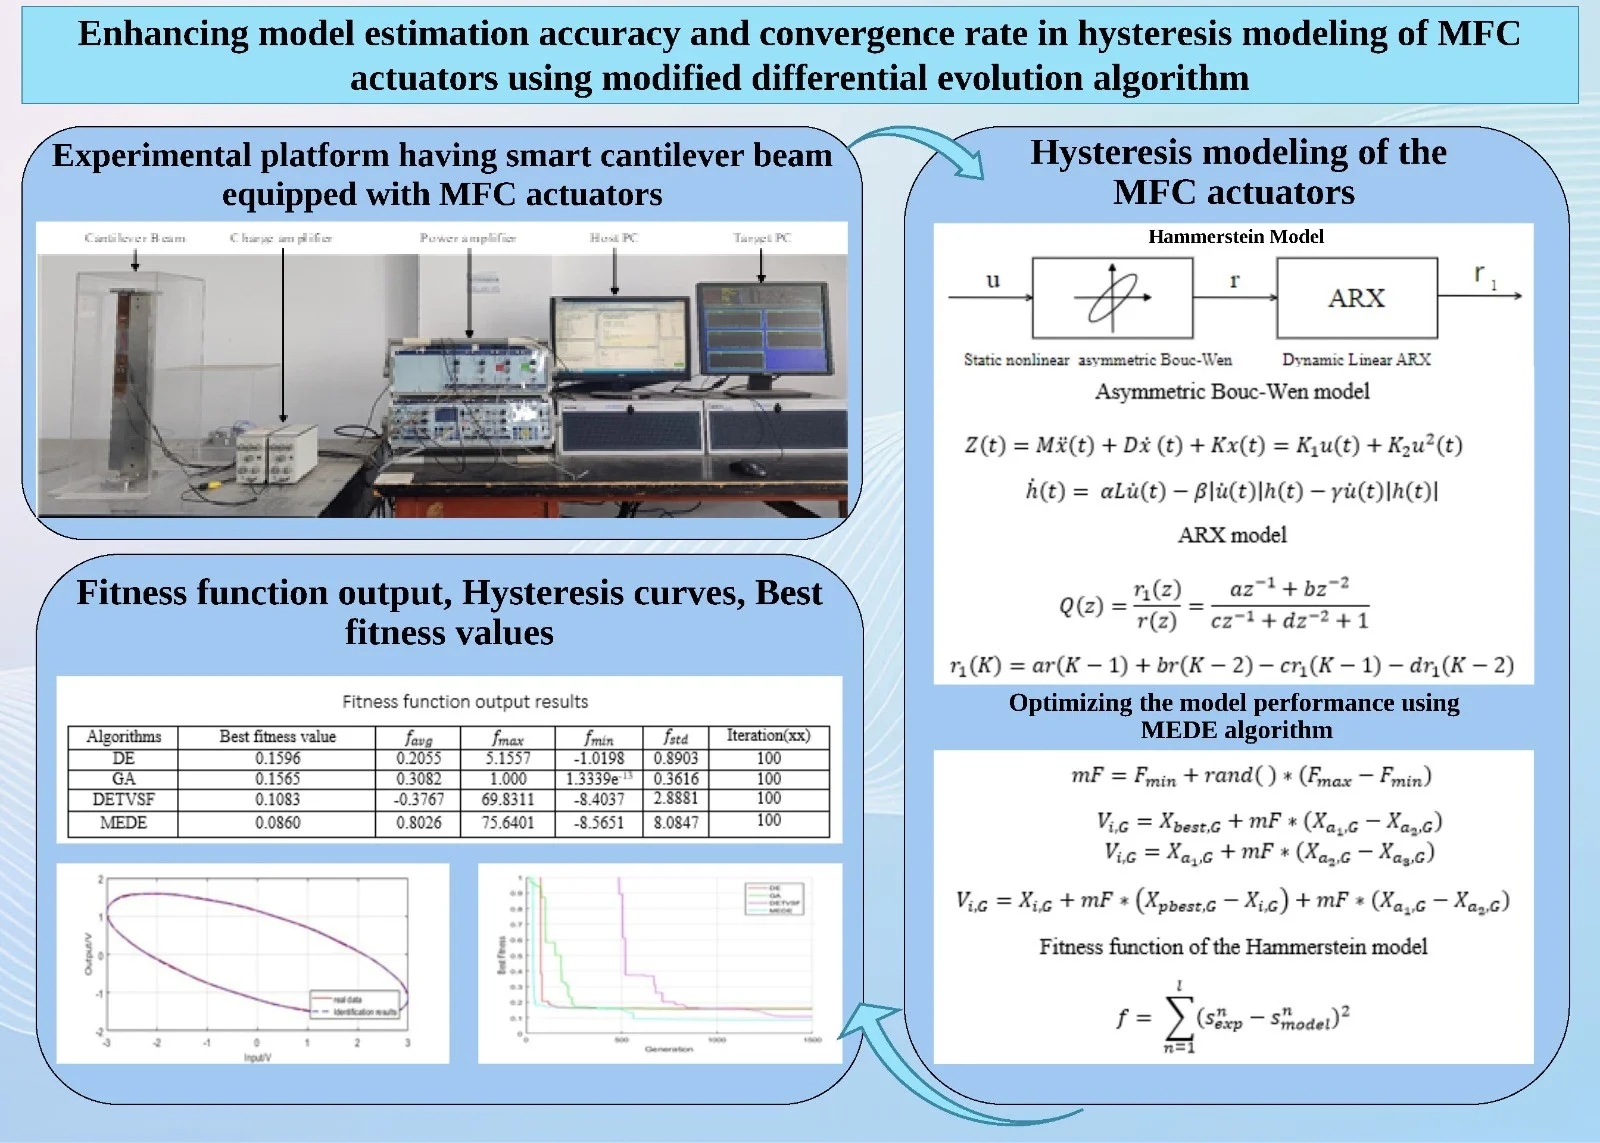 Enhancing model estimation accuracy and convergence rate in hysteresis modeling of MFC actuators using modified differential evolution algorithm